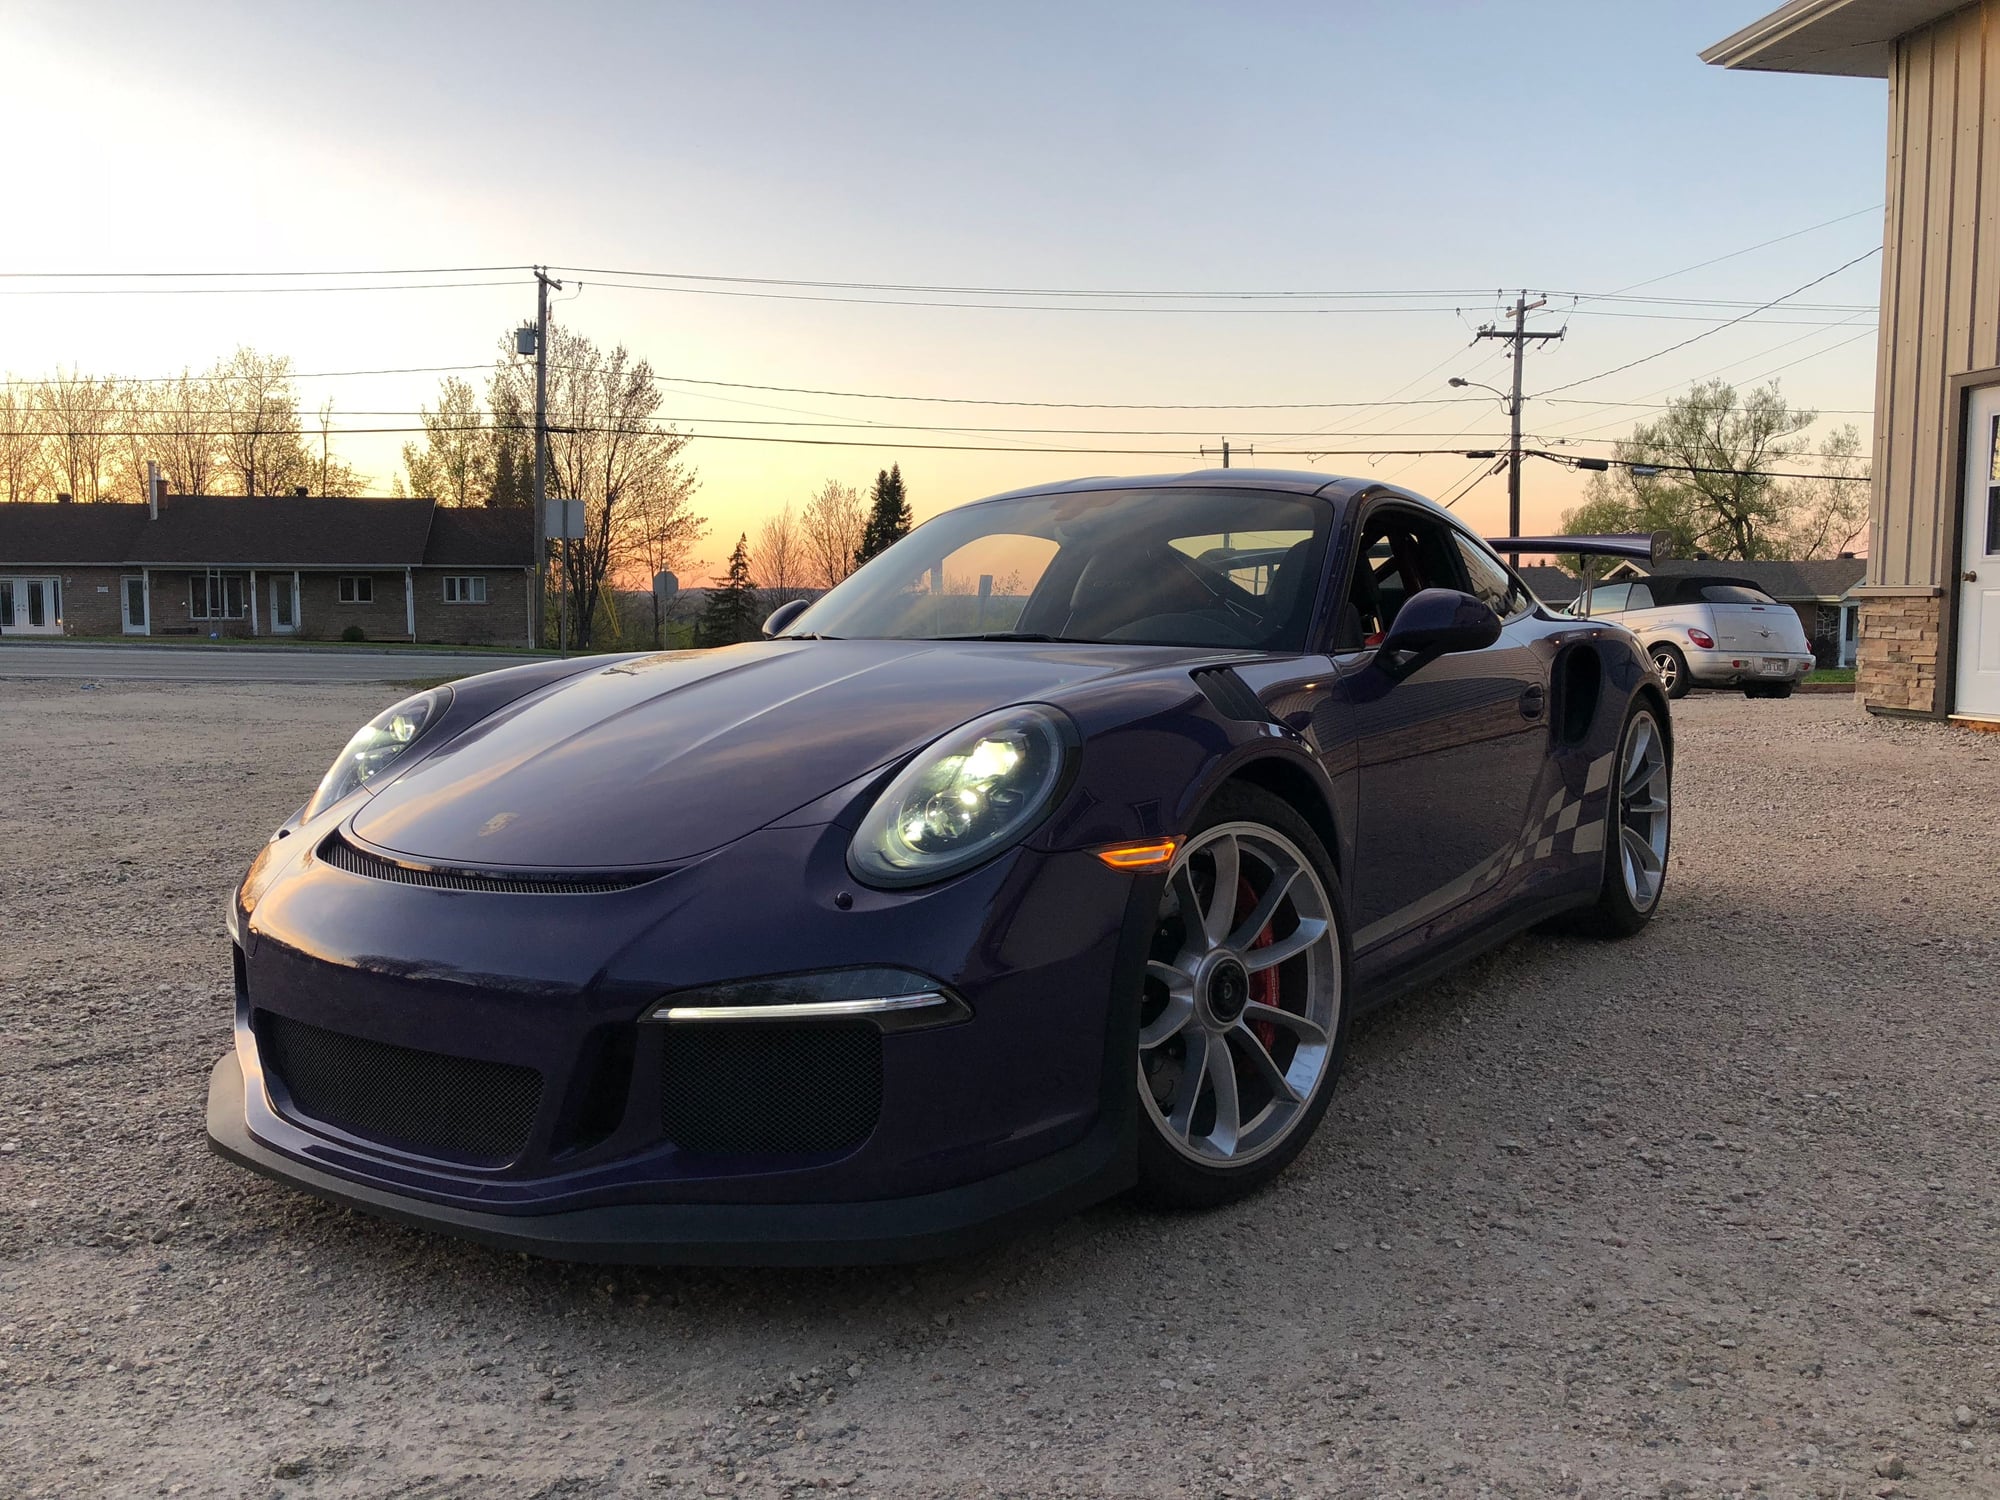 2016 Porsche GT3 - 2016 Ultraviolet GT3 RS for sale - Used - VIN WP0AF2A90GS193177 - 14,000 Miles - 6 cyl - 2WD - Automatic - Coupe - Purple - Sherbrooke, QC J1N1S4, Canada